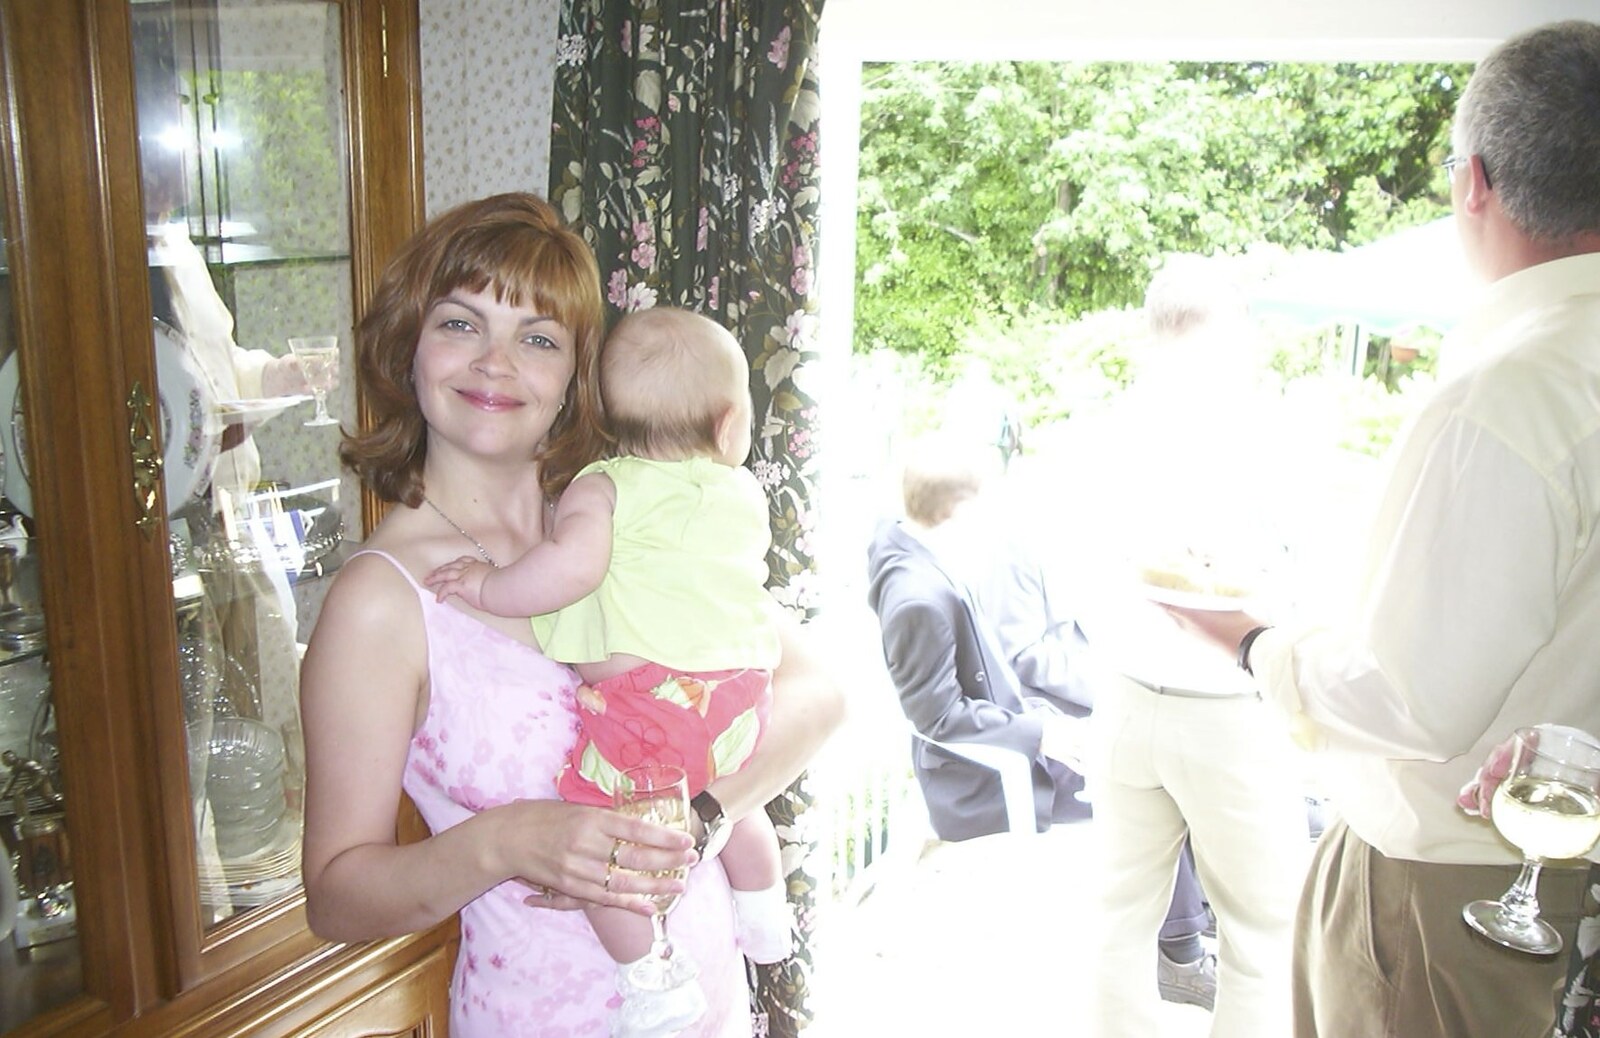 Michelle smiles from Sydney's Christening, Hordle, Hampshire - 4th May 2002